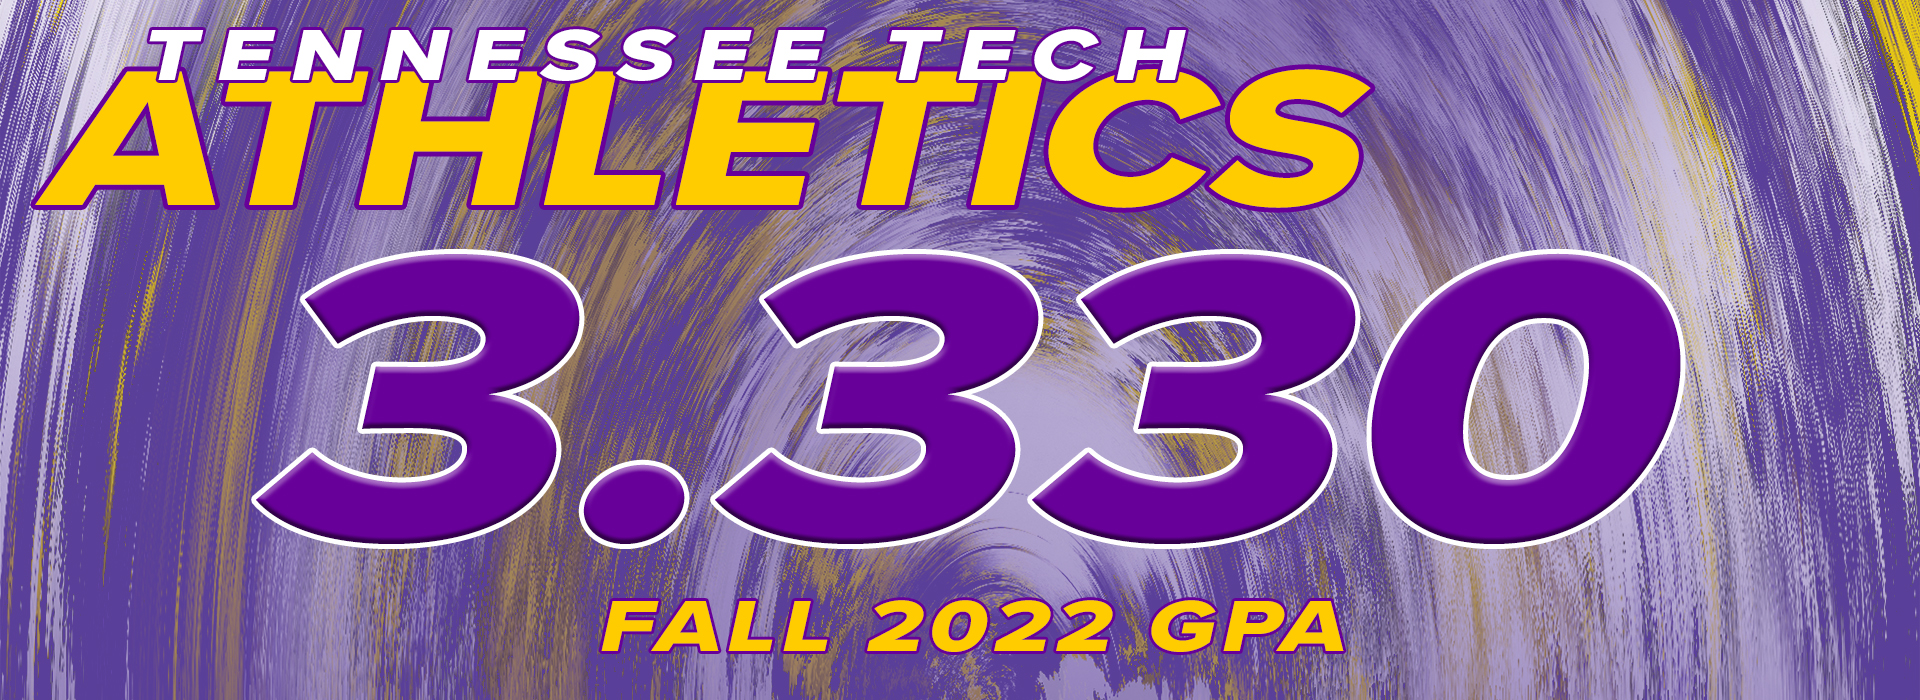 Golden Eagle student-athletes produce 28th straight semester with 3.0 or better GPA